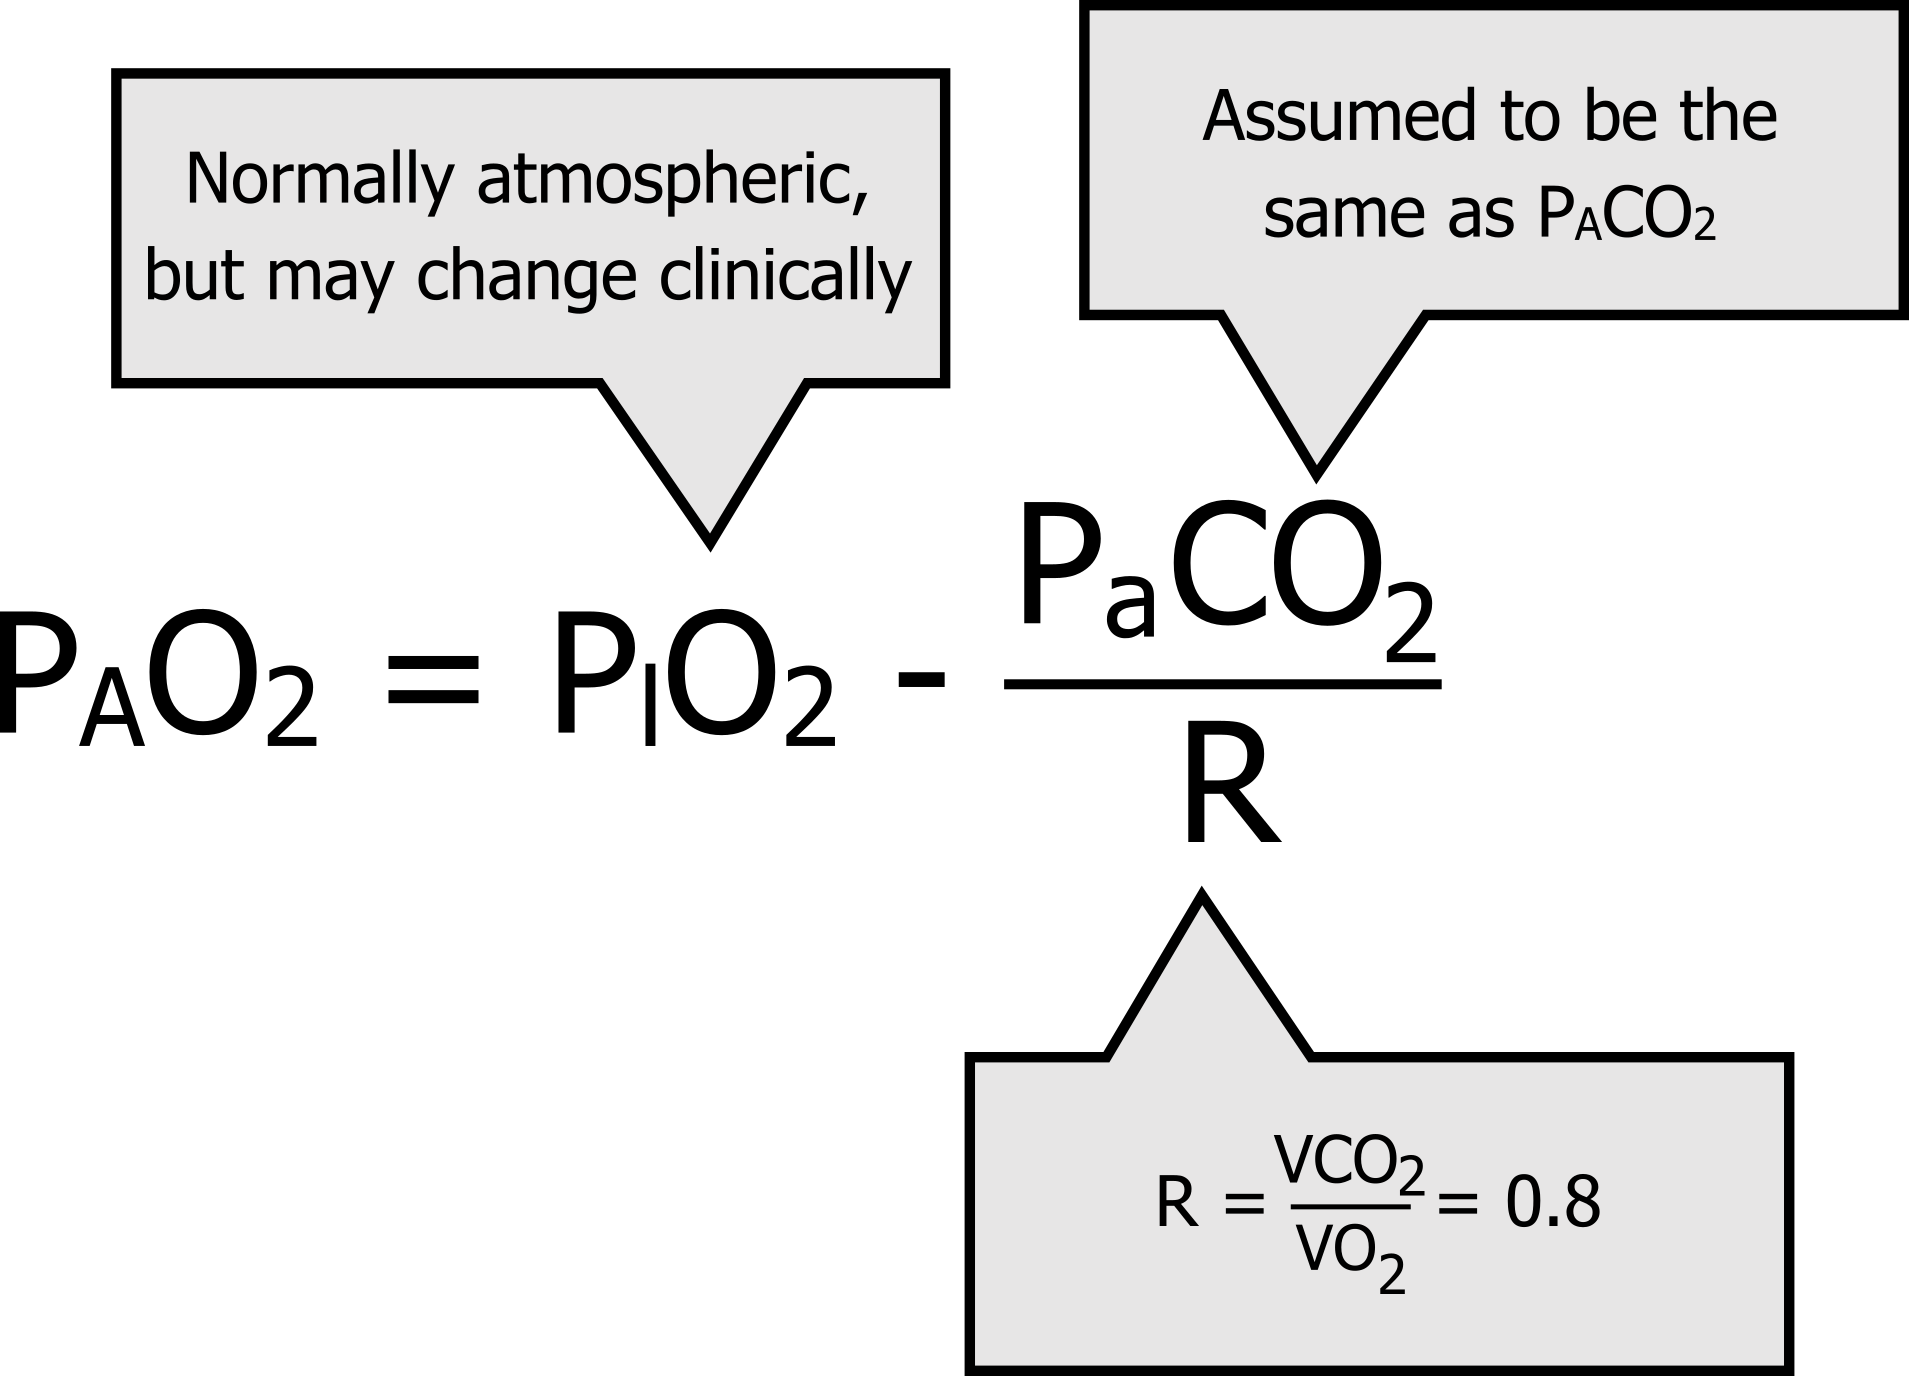 PAO2 = PIO2 - (PaCO2 divided by R). Arrow to PIO2 says Normally atmospheric, but may change clinically. Arrow to PaCO2 says assumed to be the same as PACO2. Arrow to R says R = VCO2 divided by VO2 = 0.8